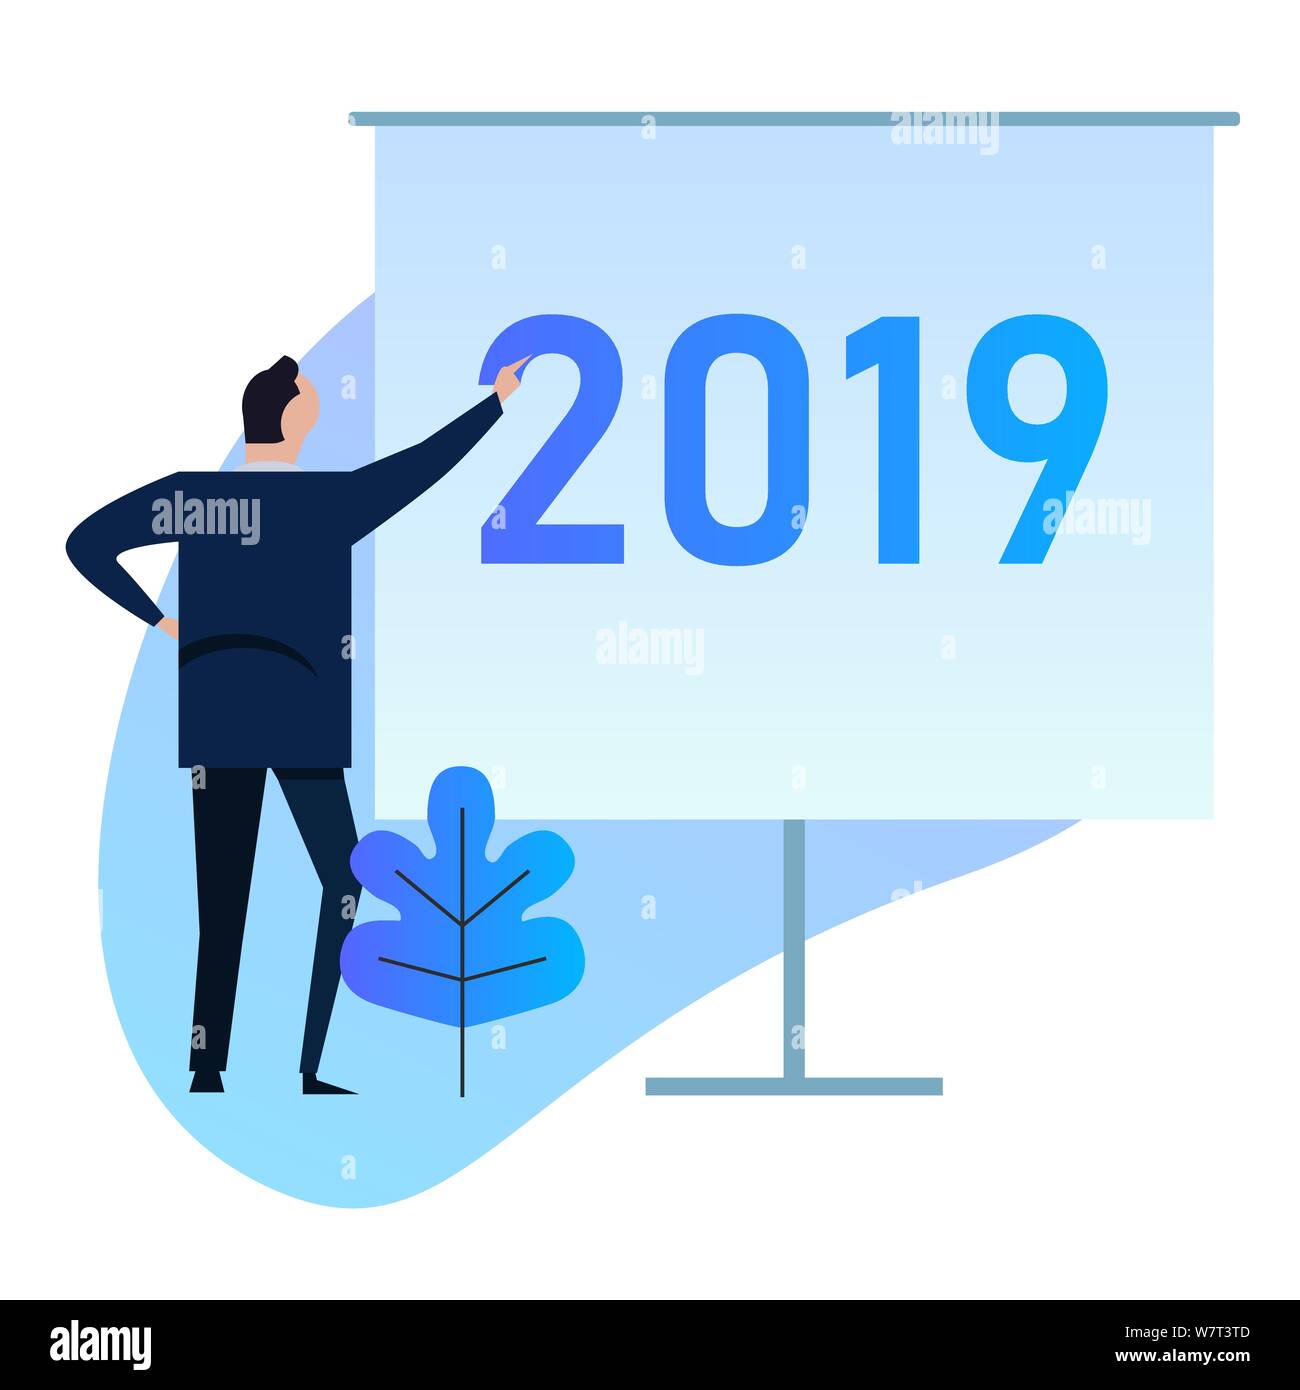 2019 Businessman standing doing presentation on new year target future vision for company Stock Vector